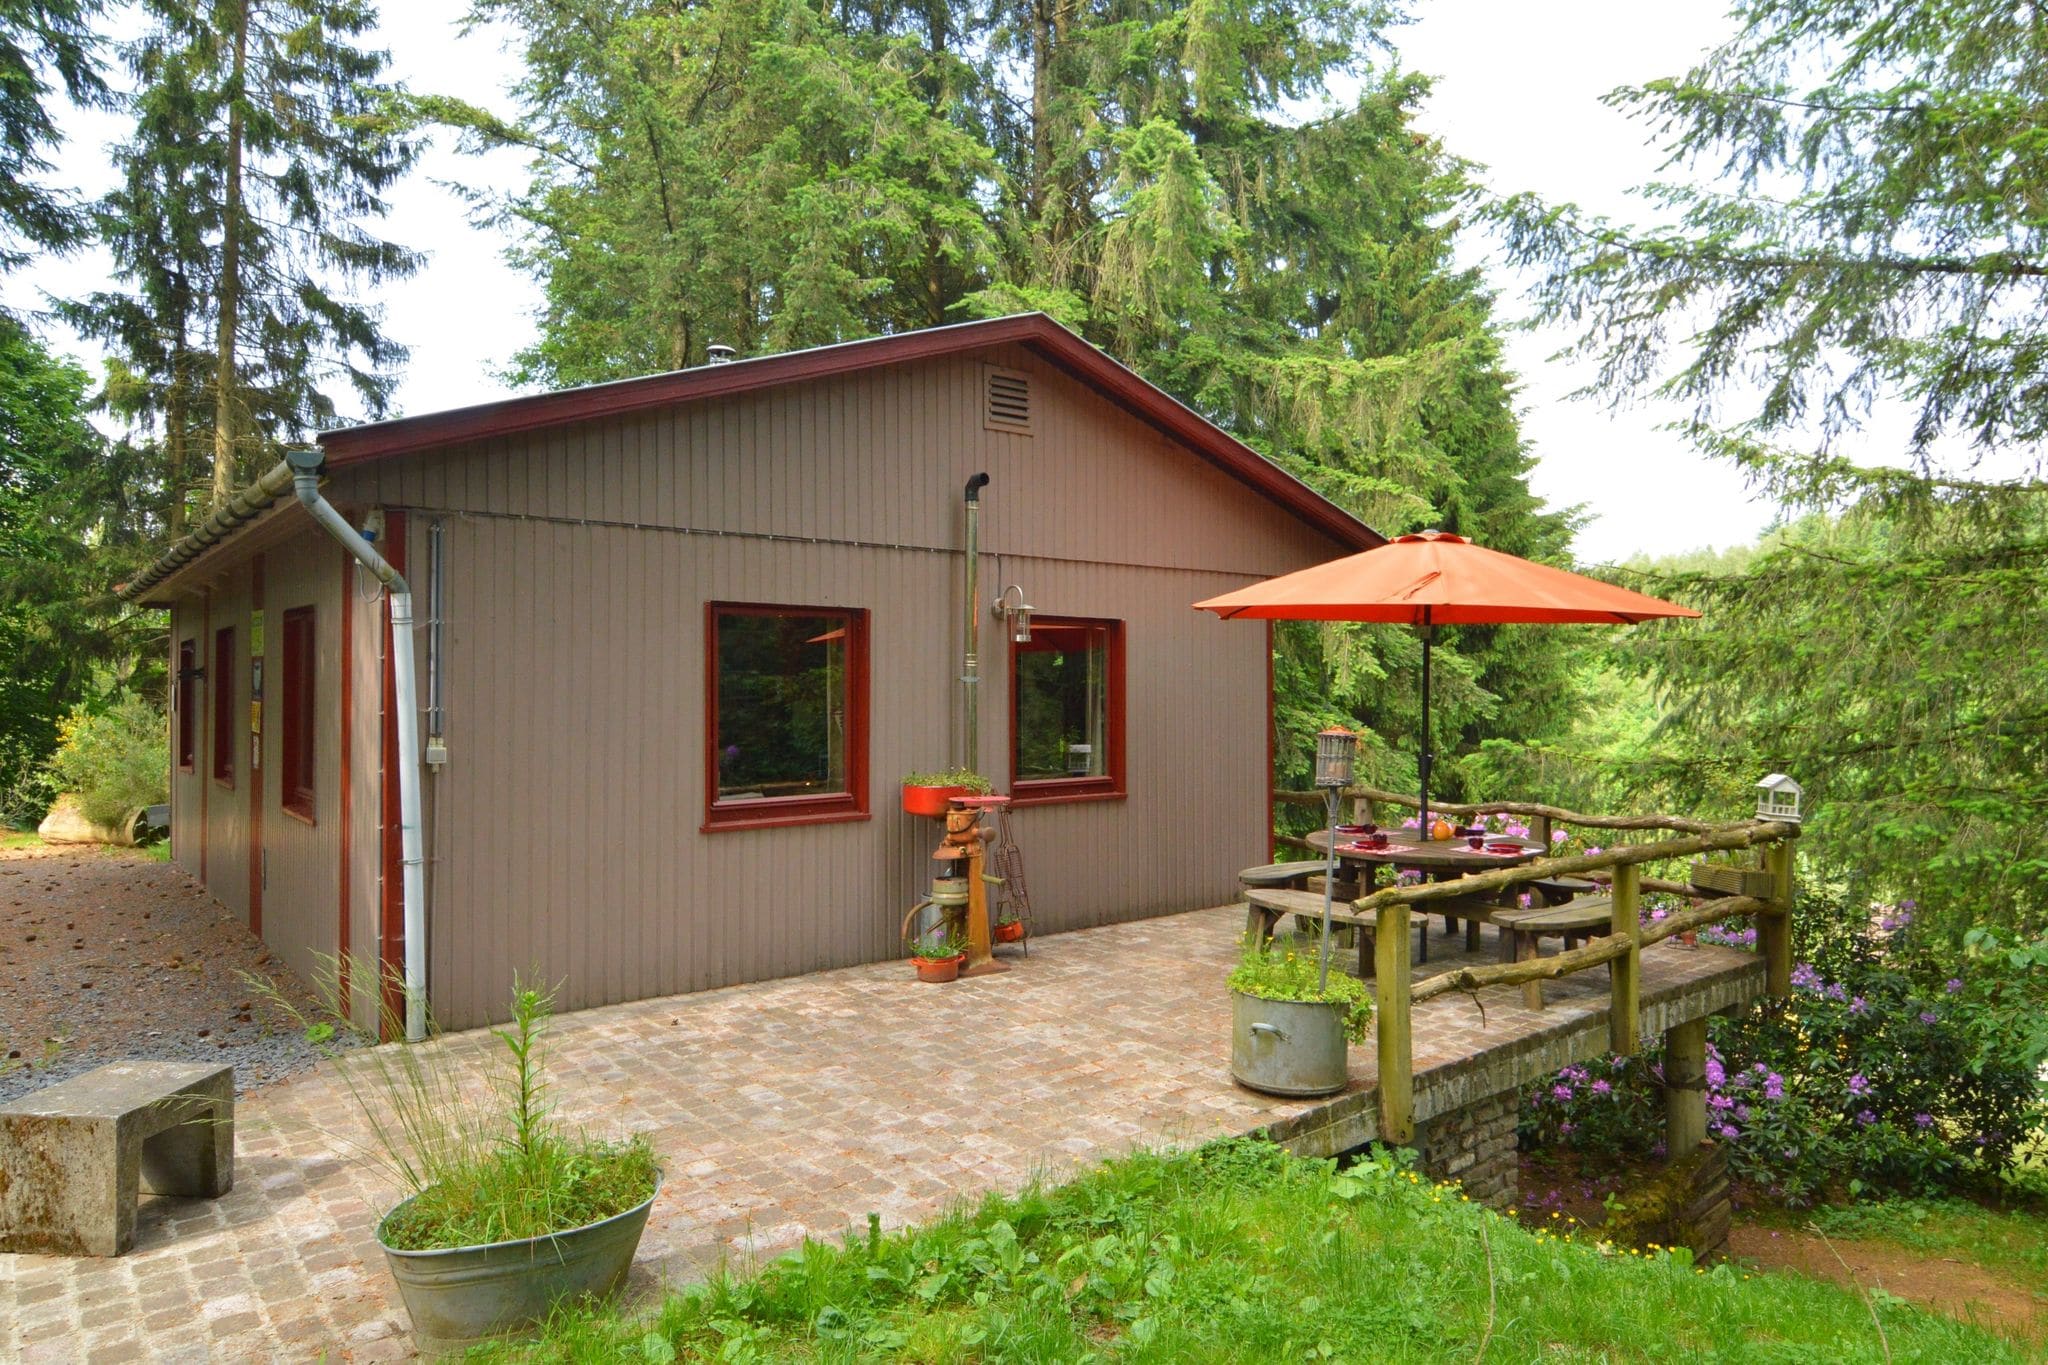 Chalet and gypsy caravan in a green and peaceful environment, near Houffalize